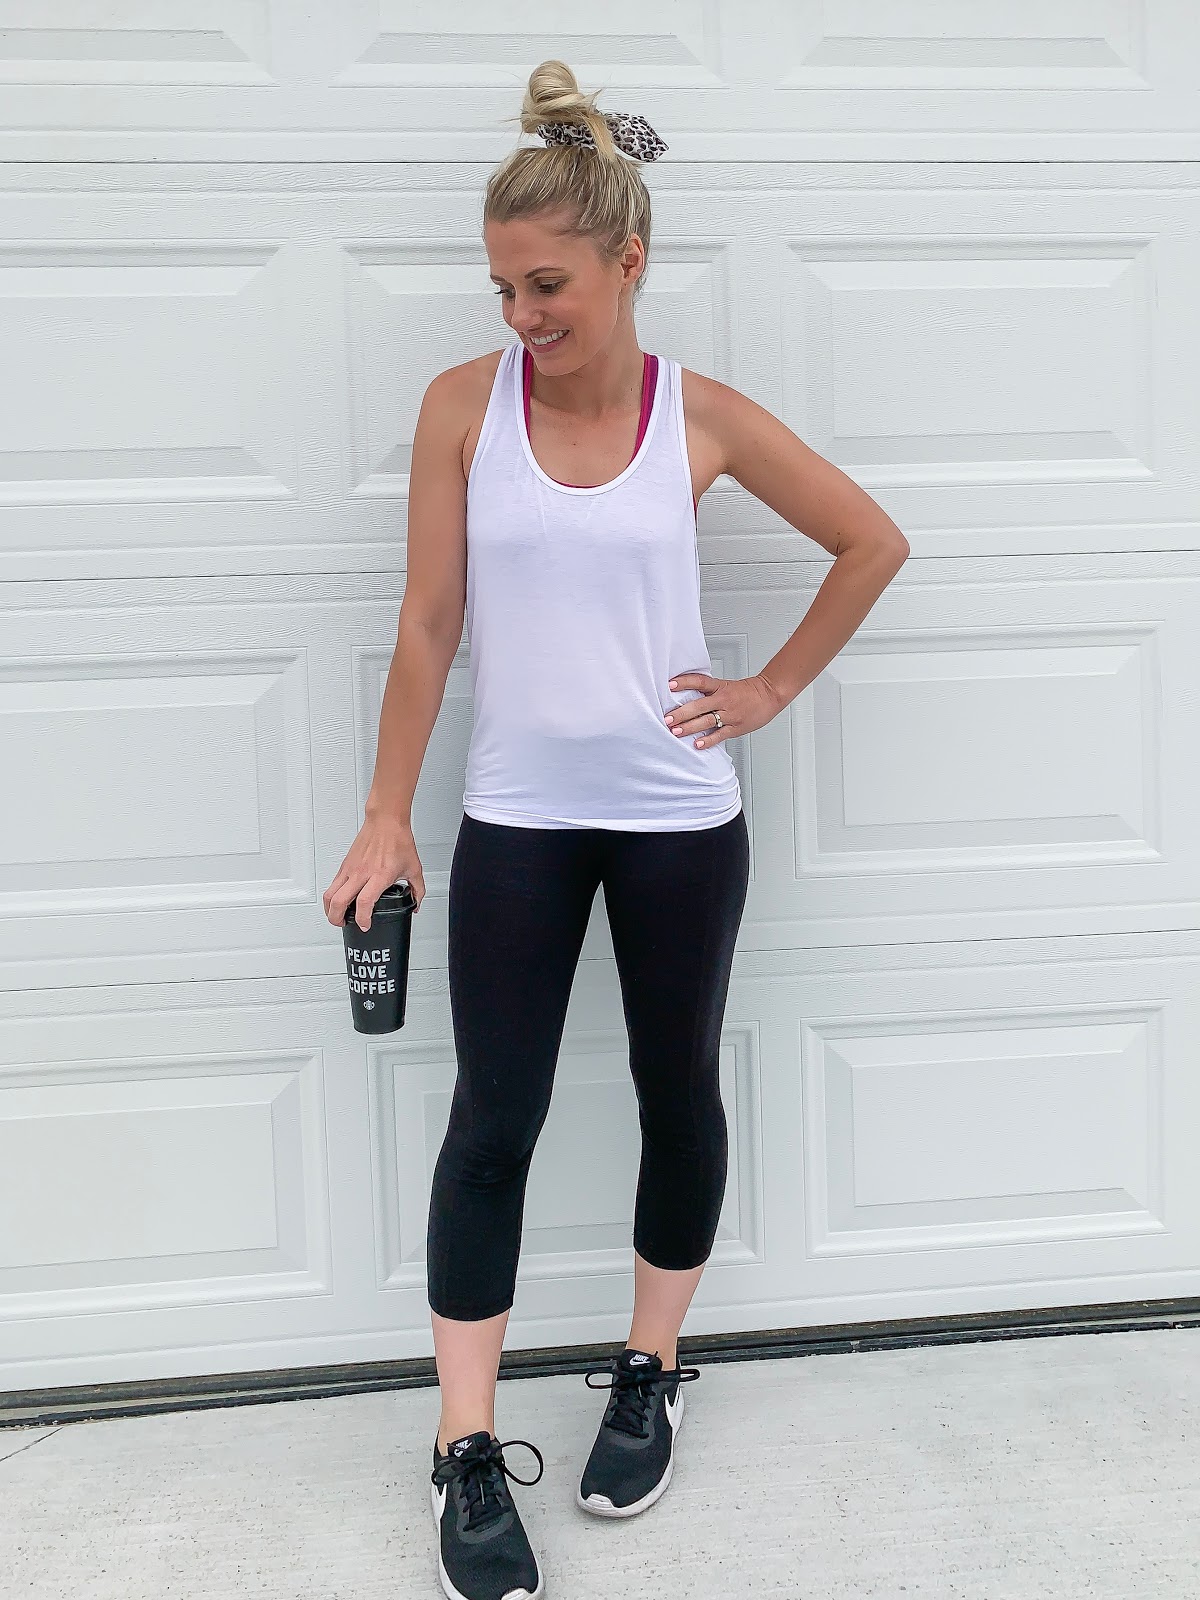 Where to shop affordable workout clothes